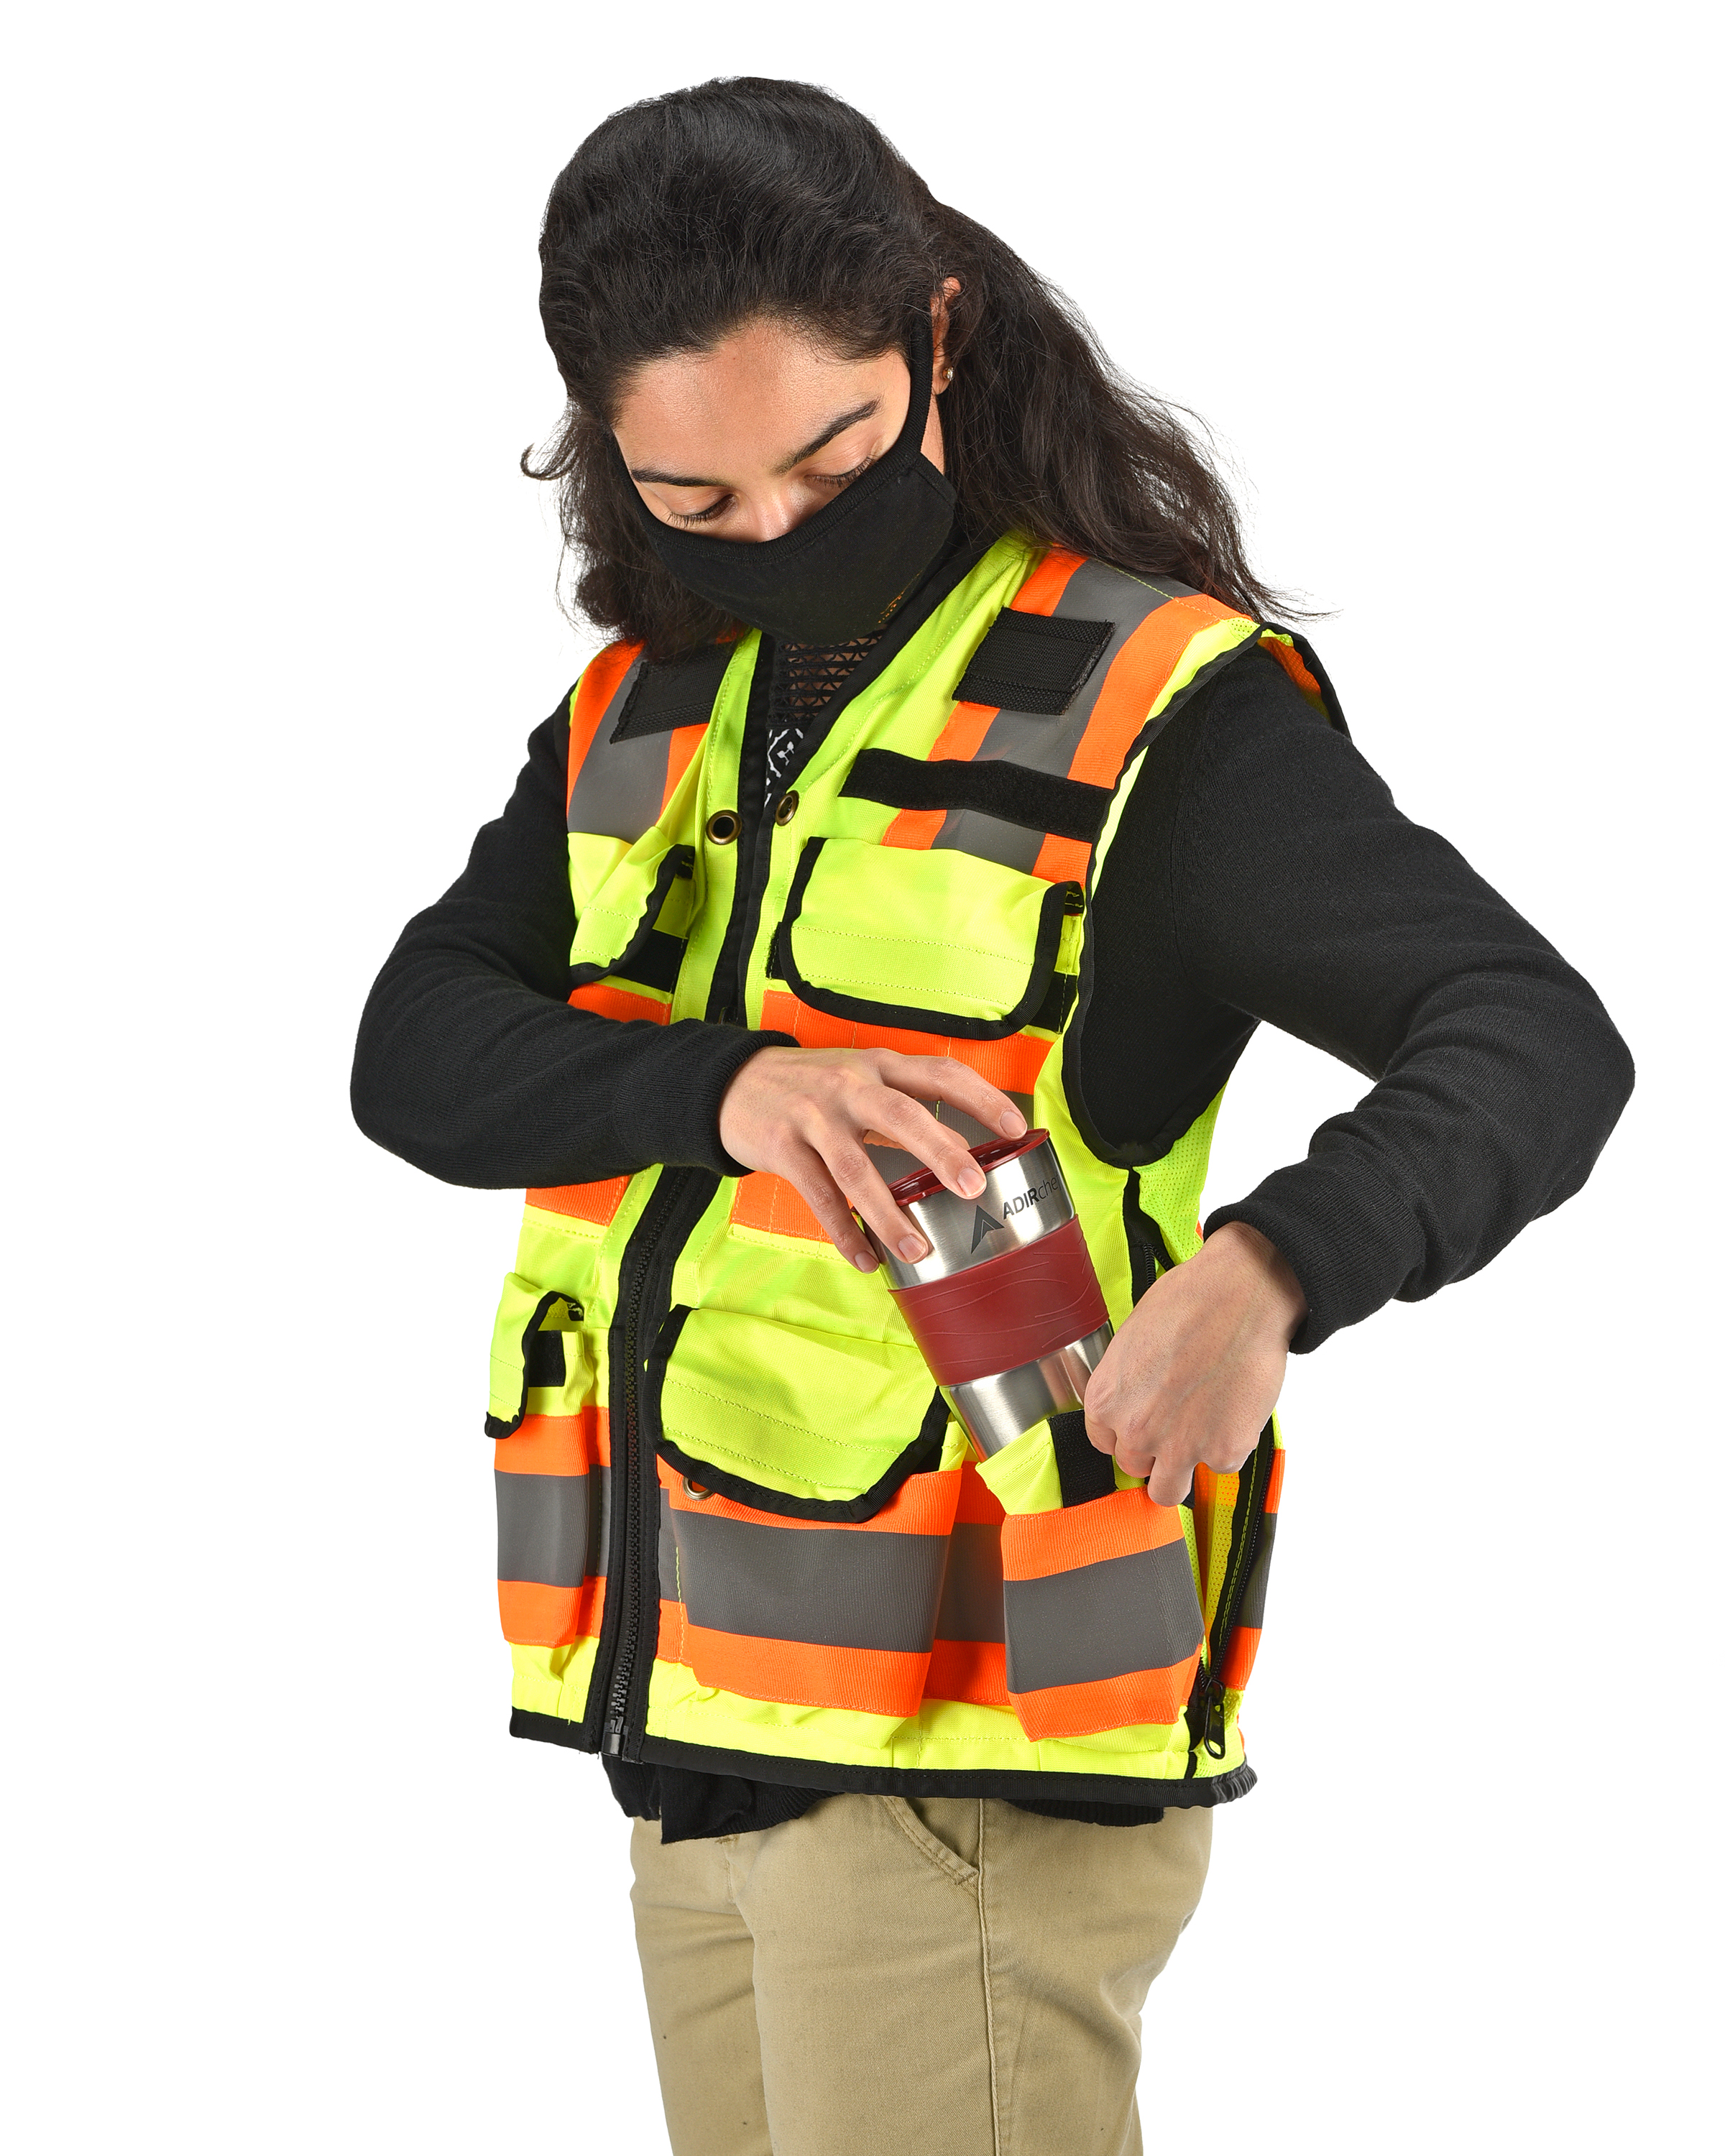 AdirPro Surveyors Utility Safety Vest, Class 2, High Visibility, Heavy Duty,  Yellow, Small